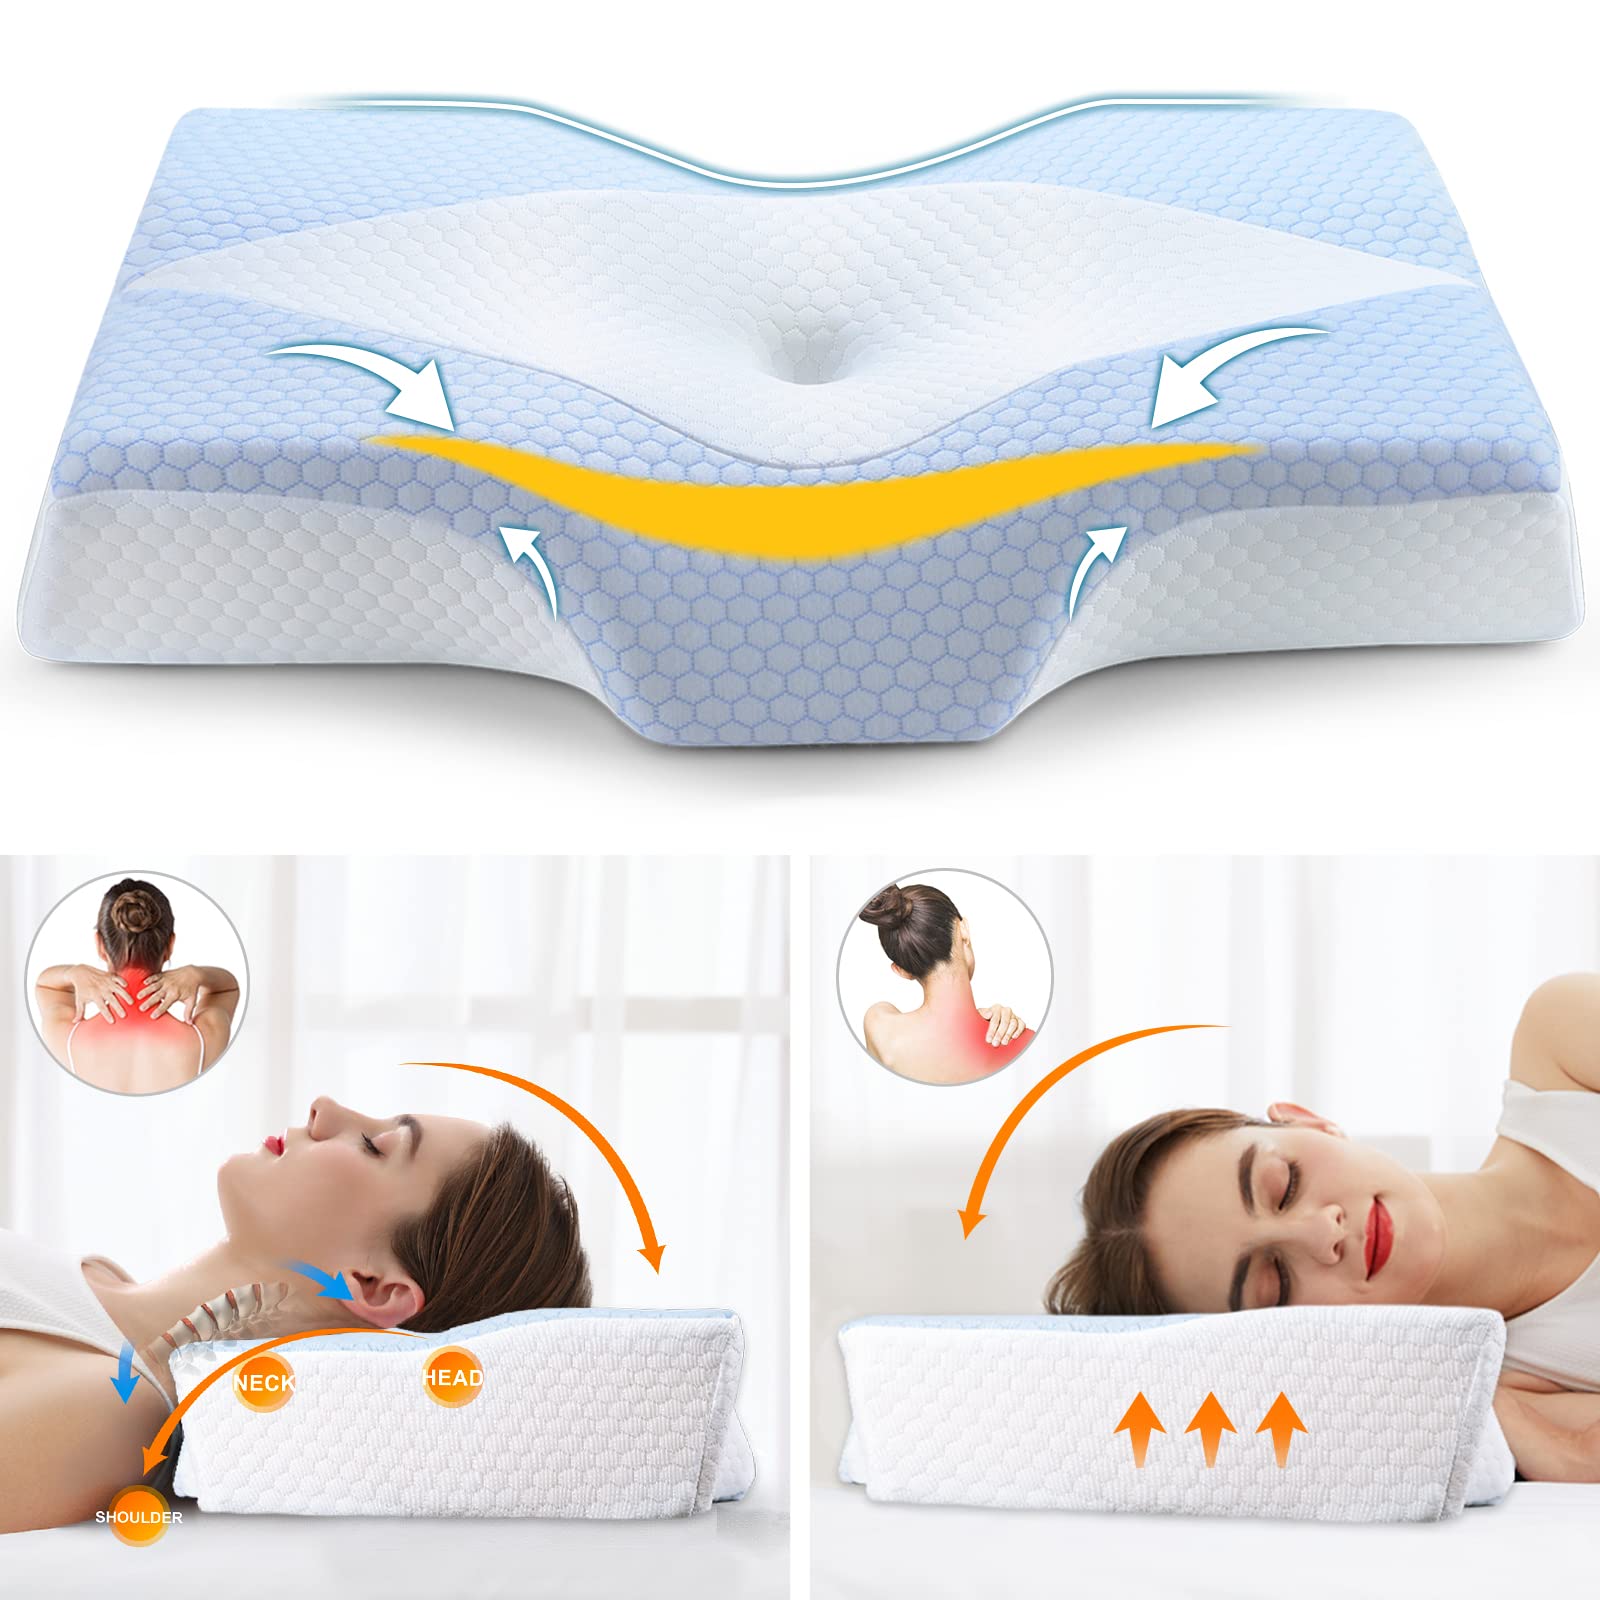 Neck Pillow Cervical Memory Foam Pillows for Pain Relief Sleeping